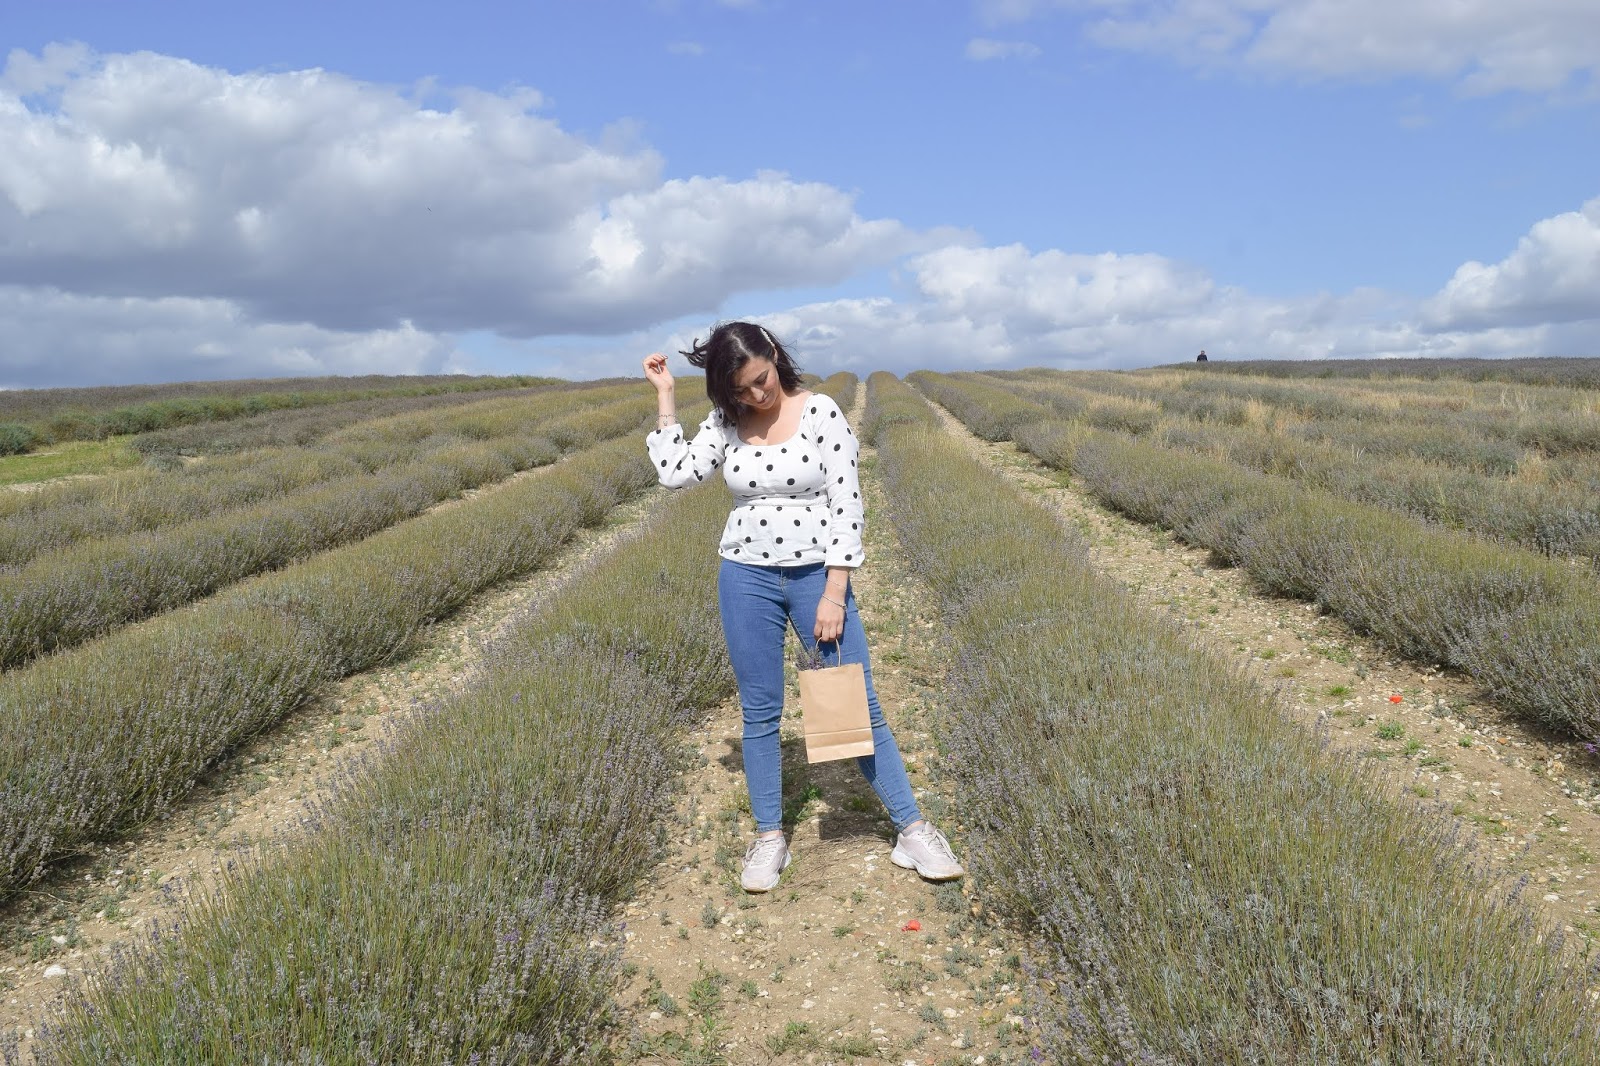 A photograph of me posing in the middle of the lavender field wearing a white and black polkadot long sleeve top and blue jeans. I am looking down with one hand in my hair and holding a brown paper bag with lavender in with my other hand.